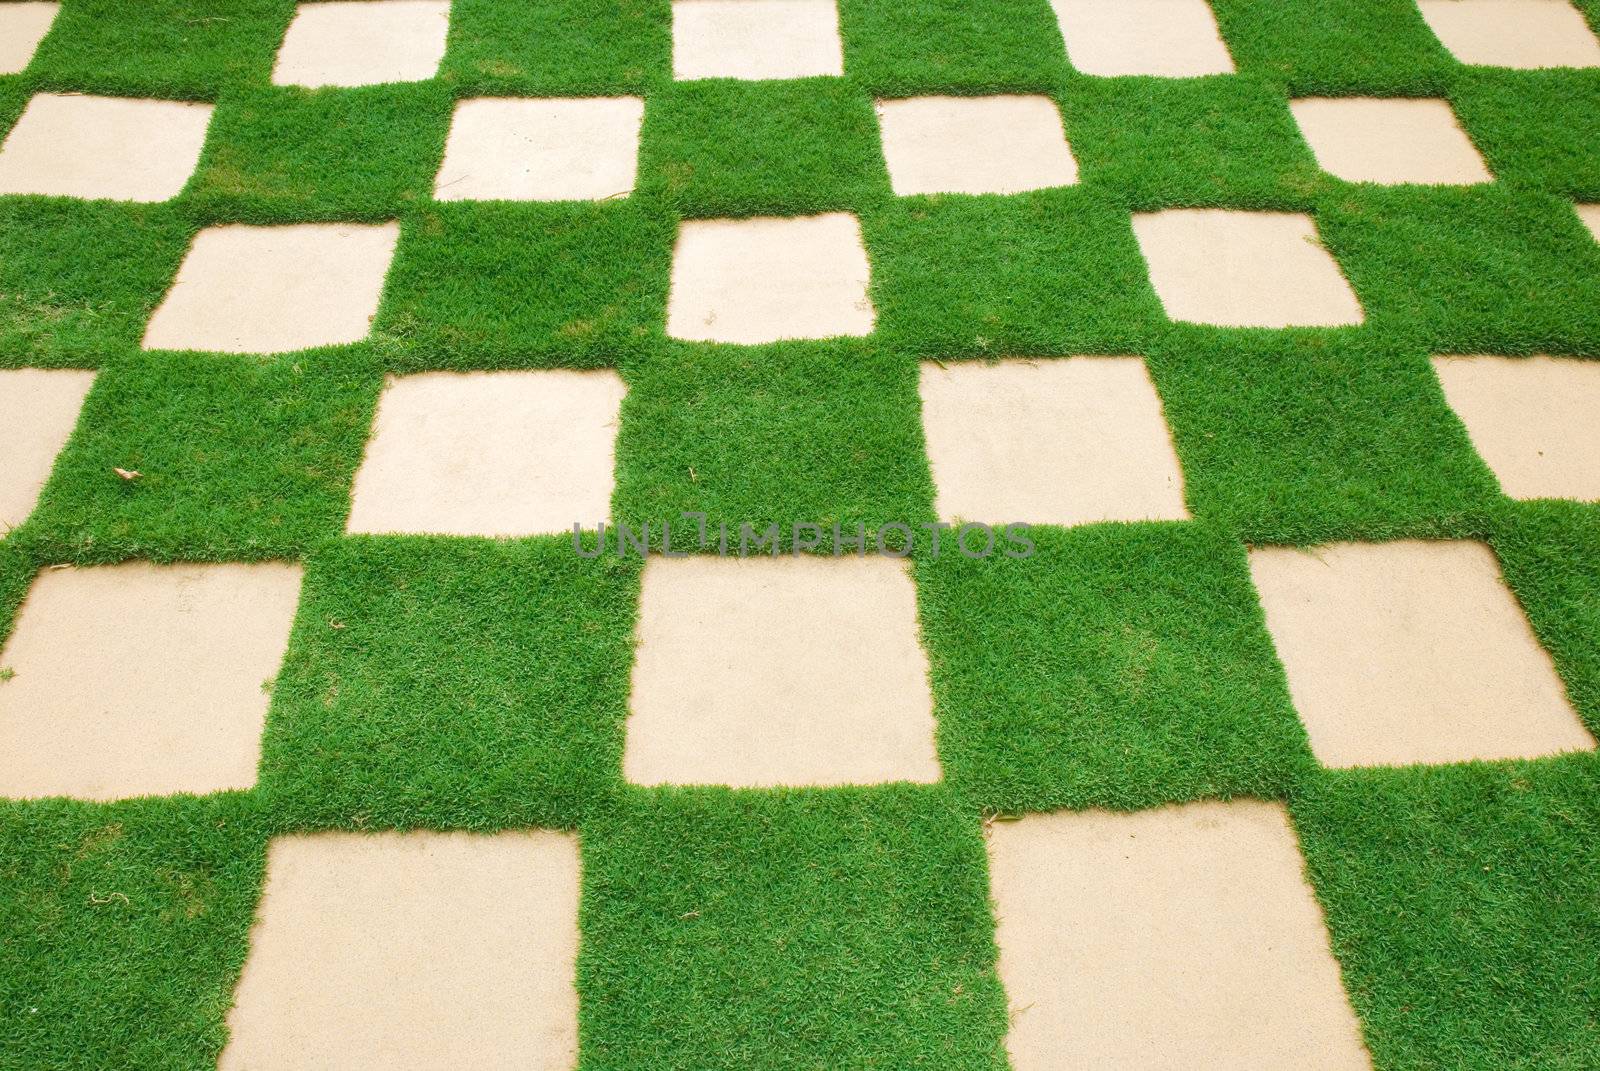 grass tile for background purpose